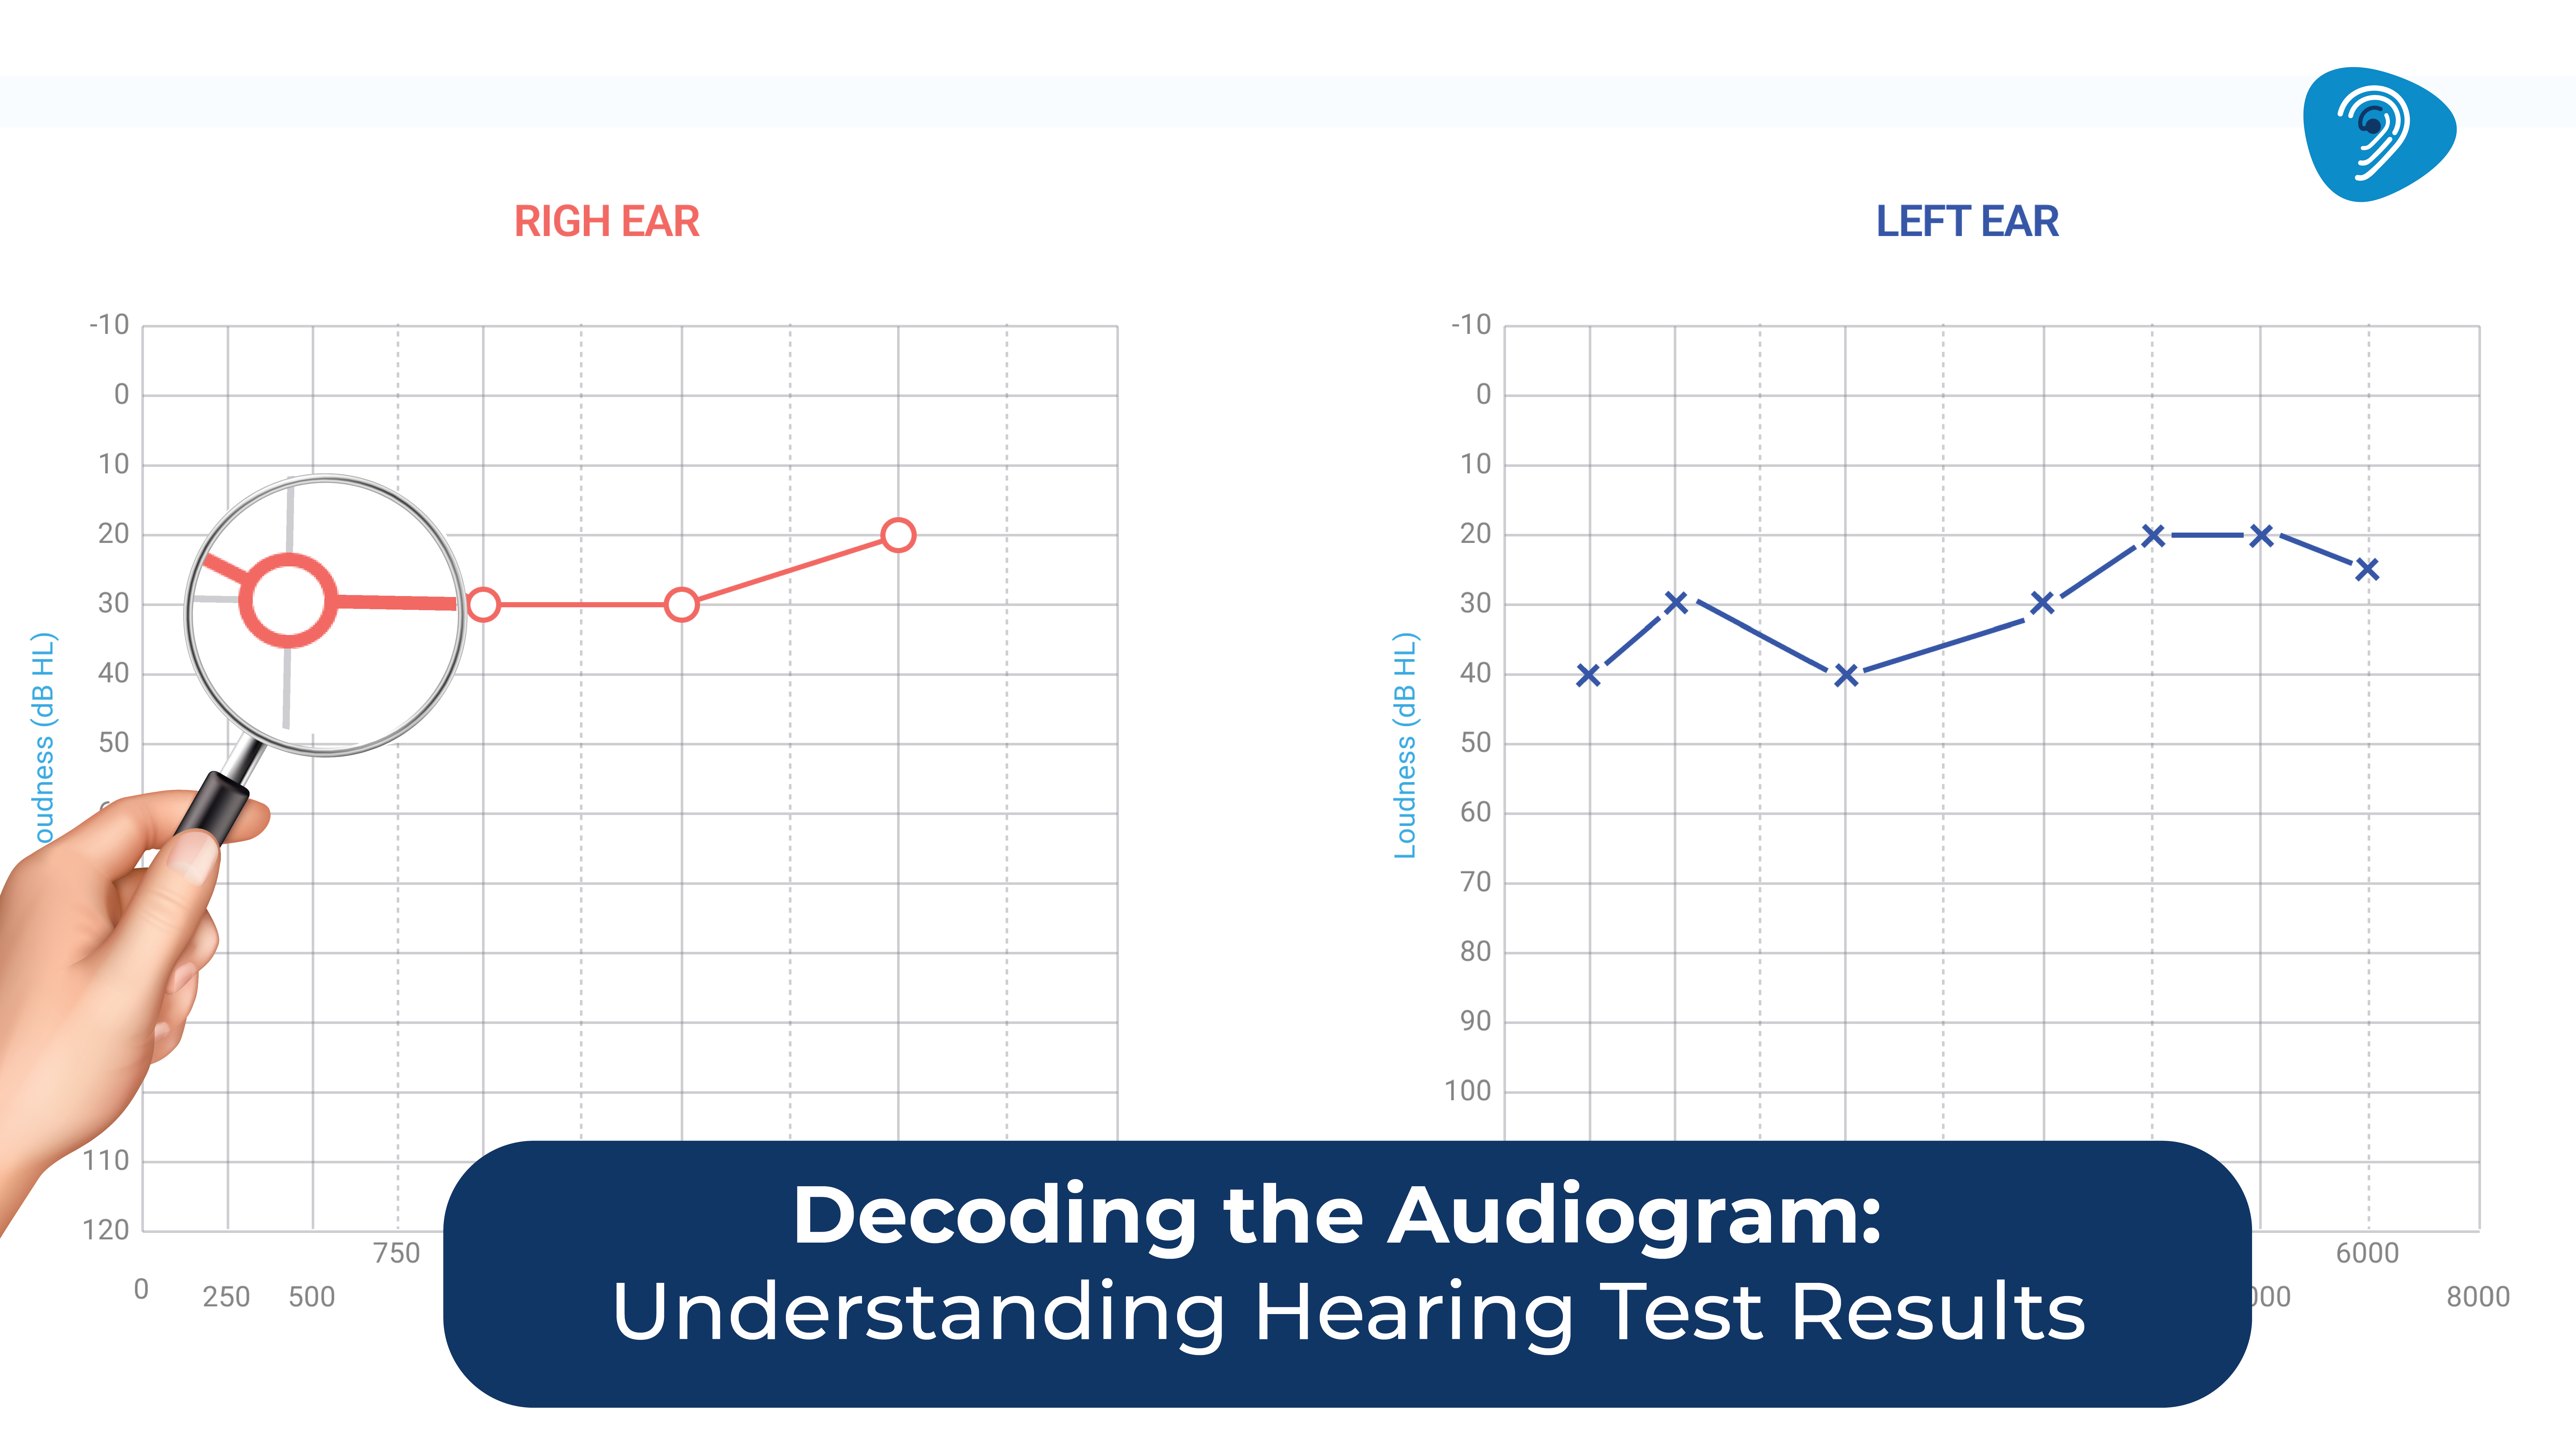 Decoding the Audiogram: Understanding Hearing Test Results